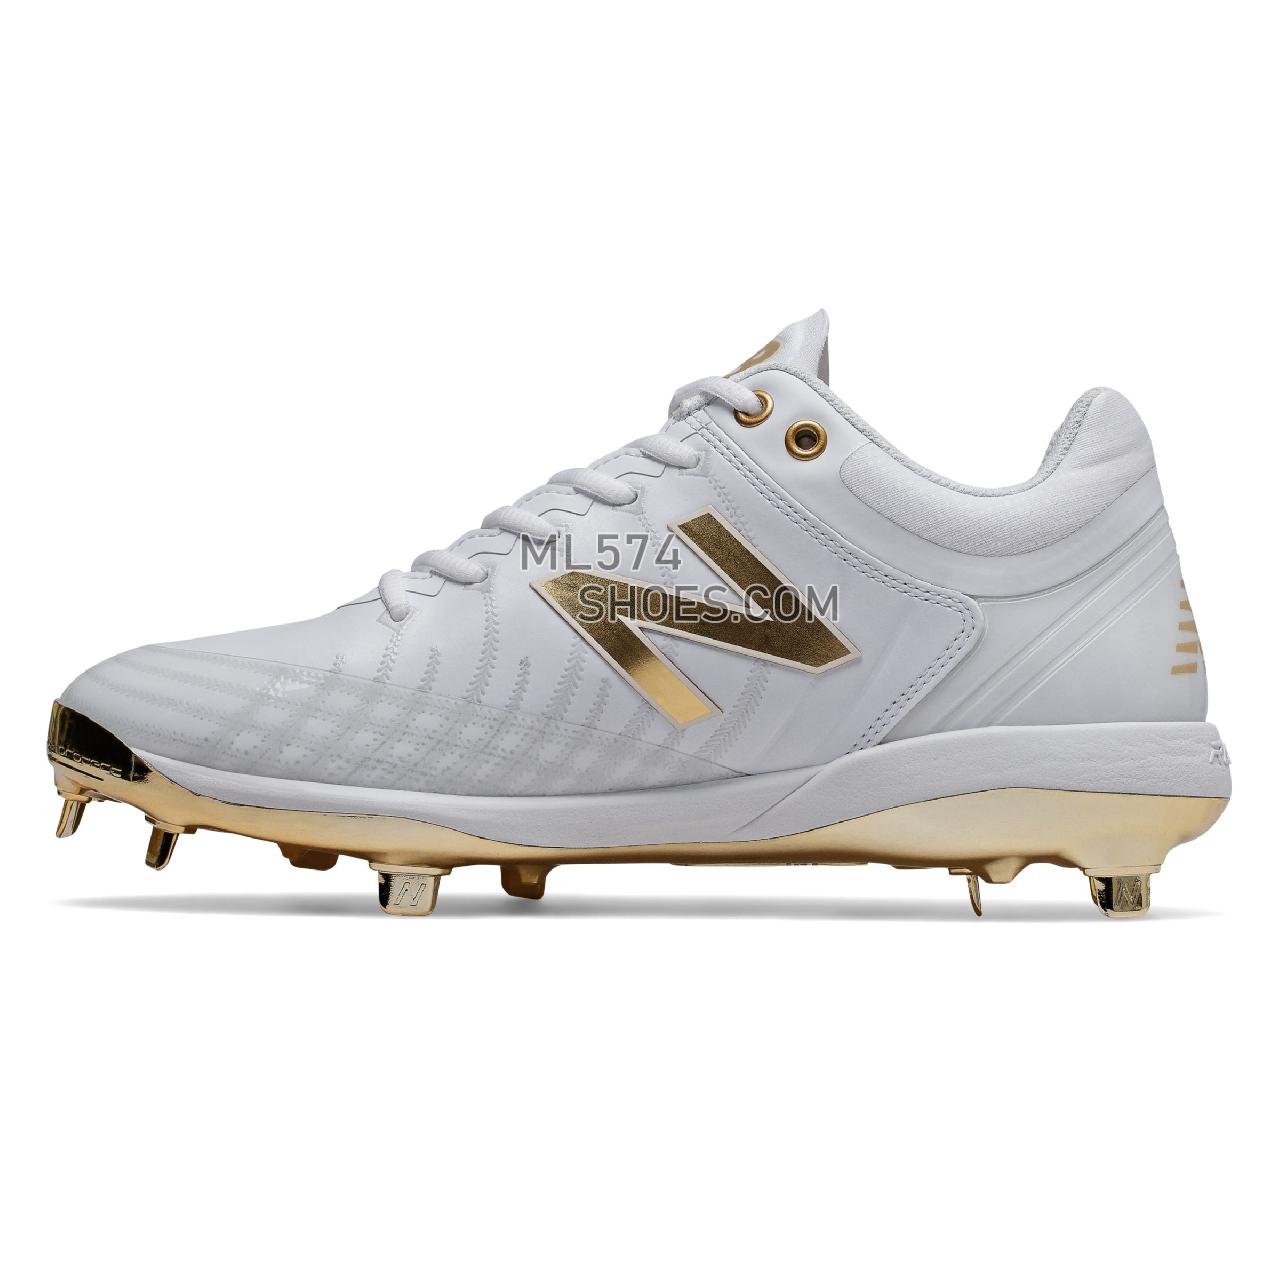 New Balance 4040v5 Hole in the Wall Gang - Men's Baseball Turf - White with Gold - L4040WG5